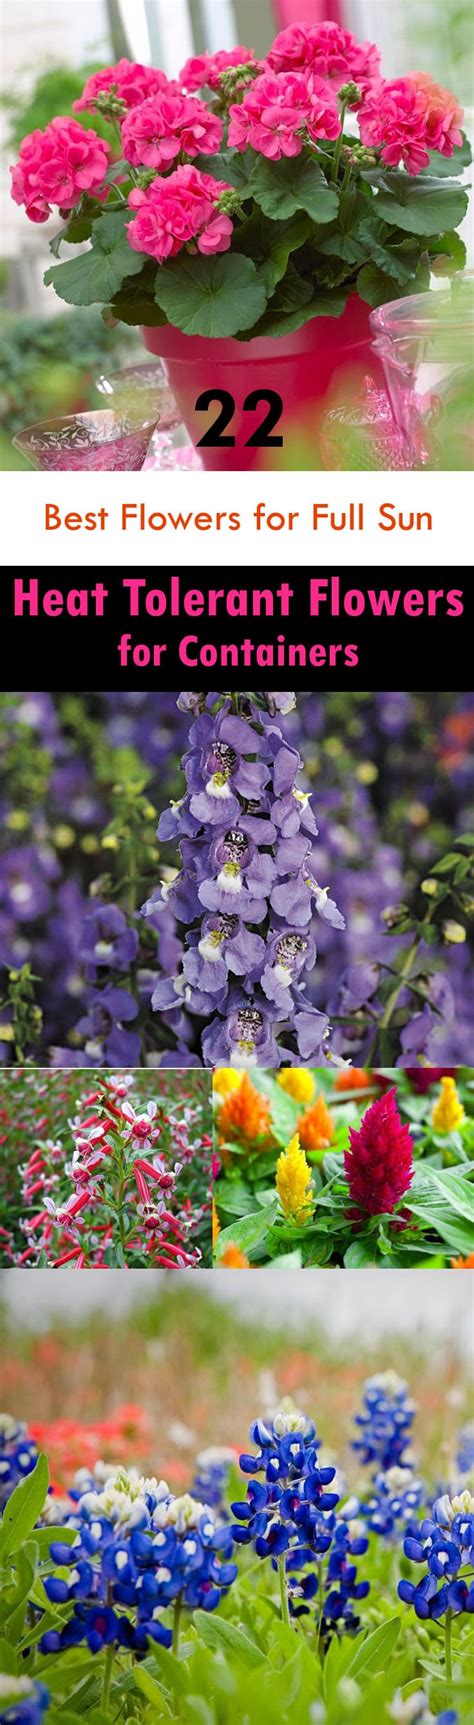 22 Best Flowers For Full Sun Heat Tolerant Flowers For Containers